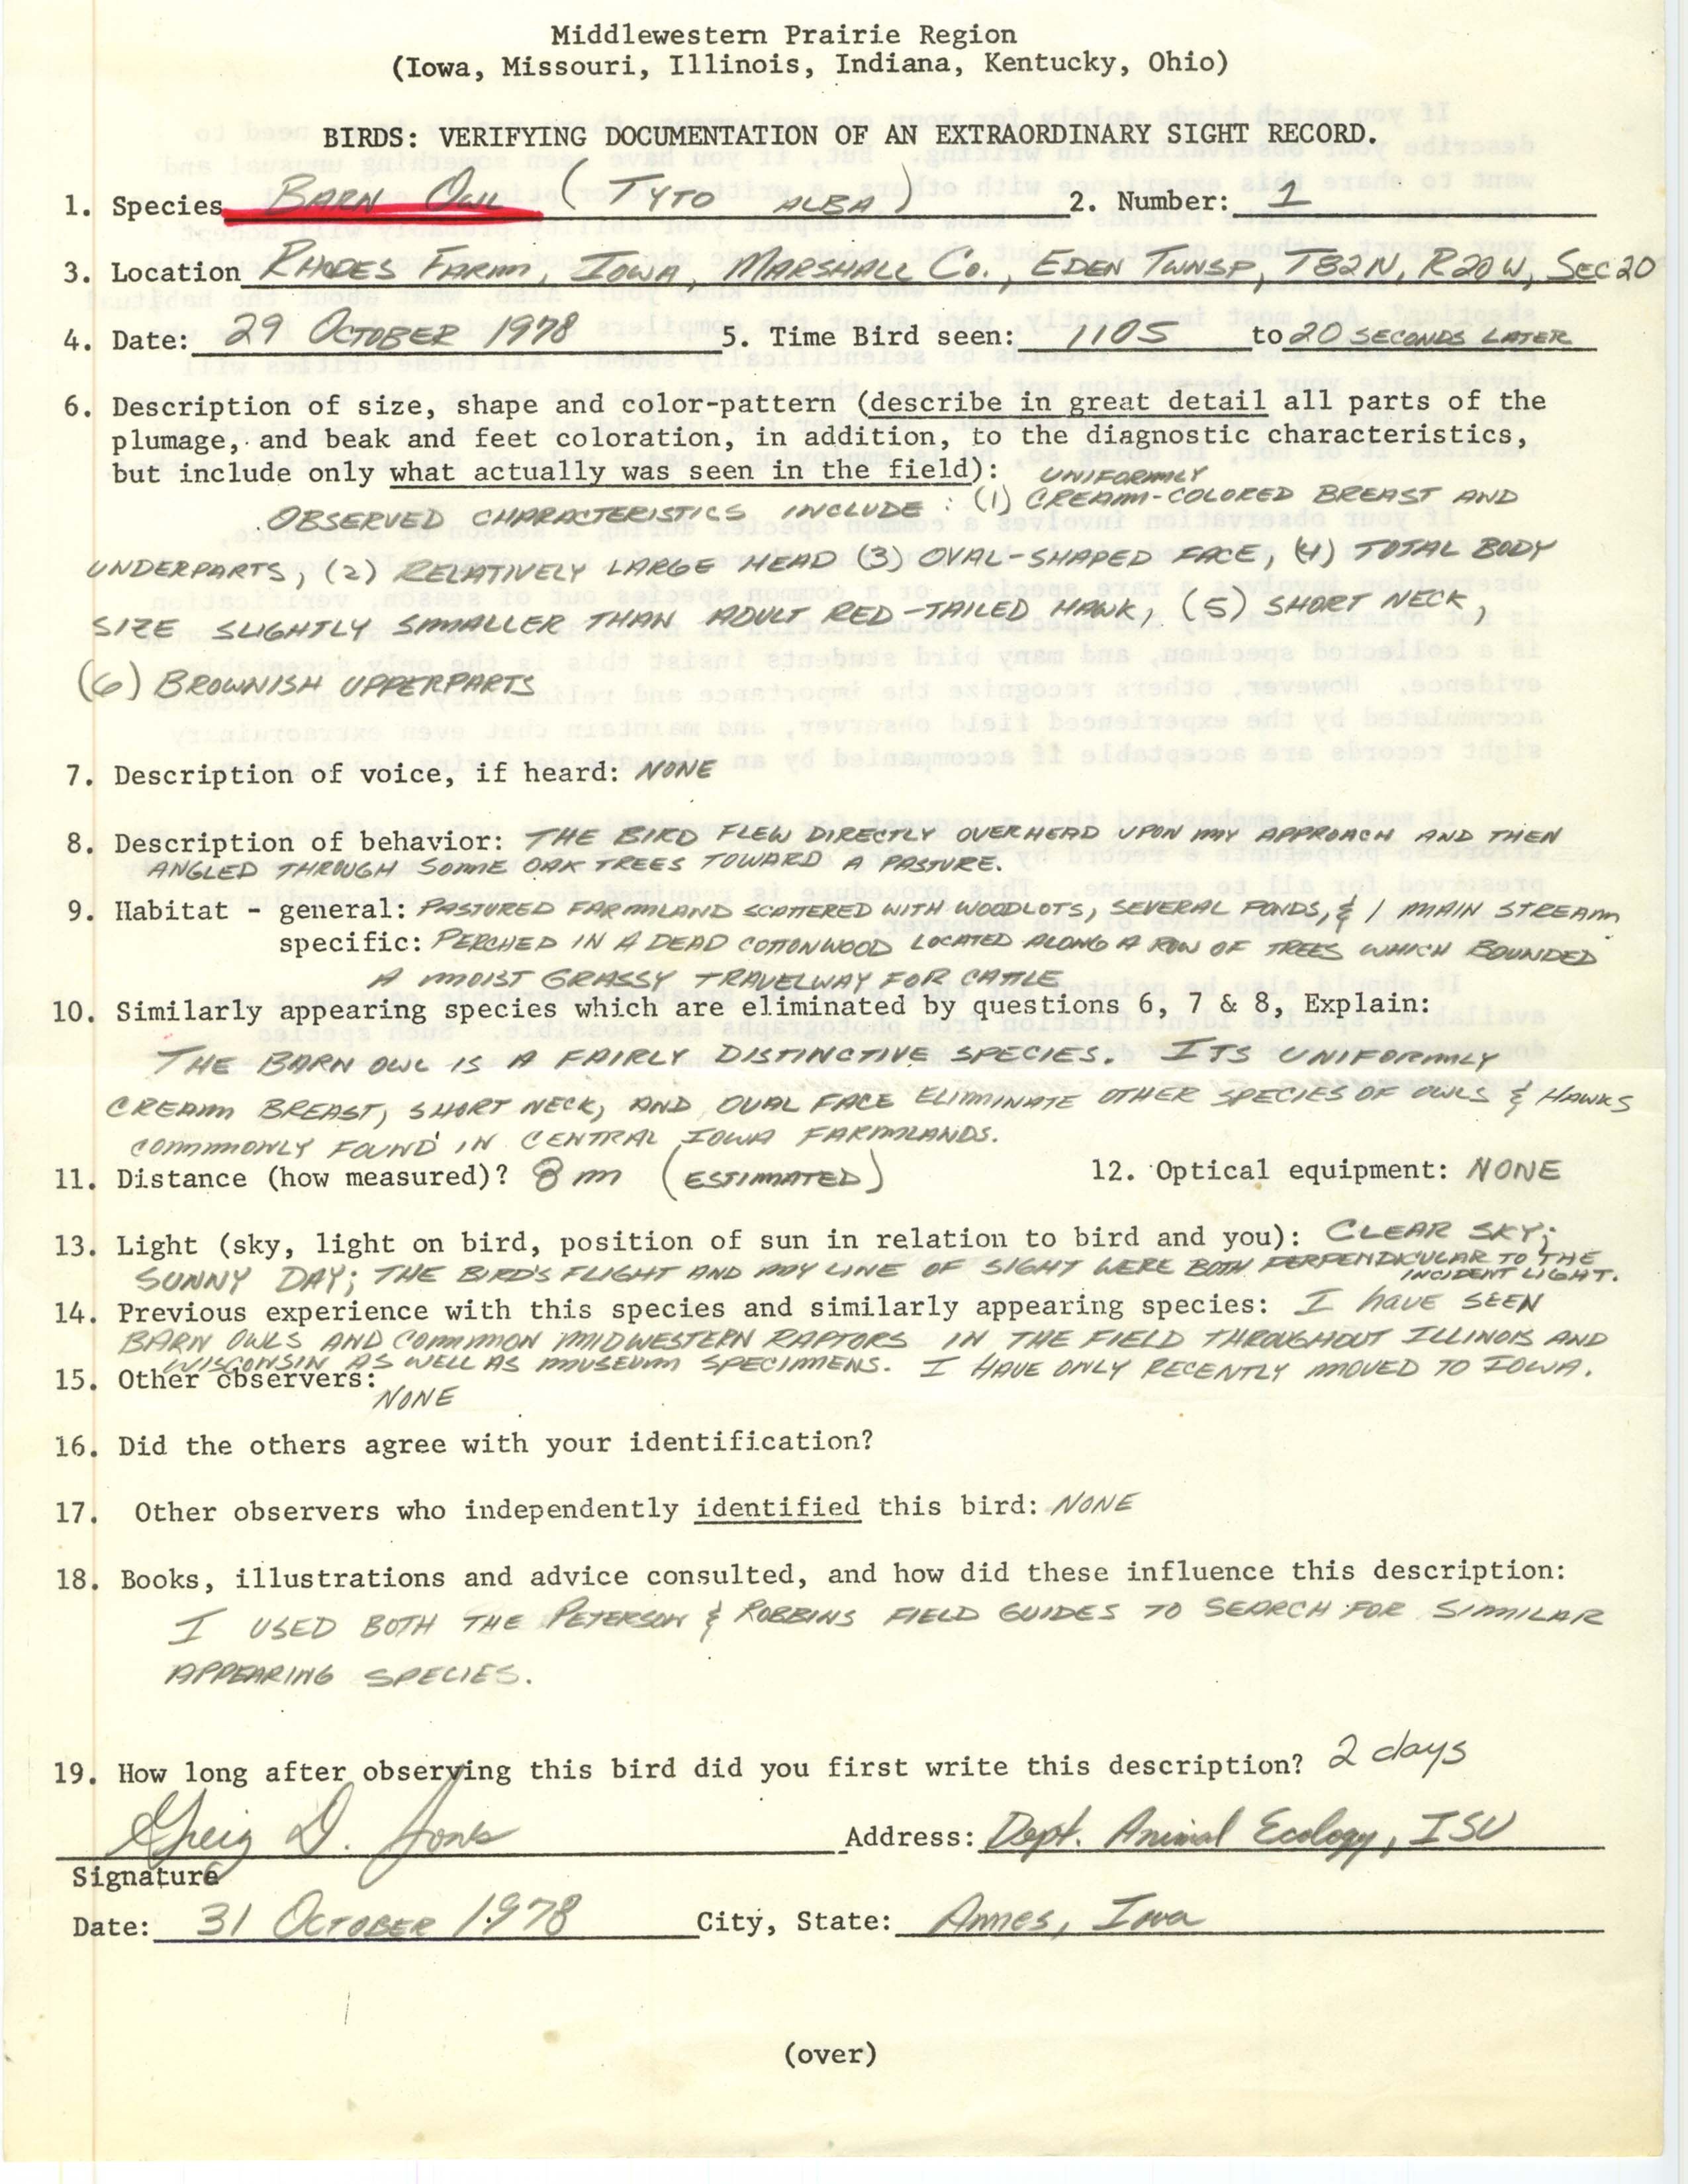 Rare bird documentation form for Barn Owl at Eden Township in Marshall County, 1978